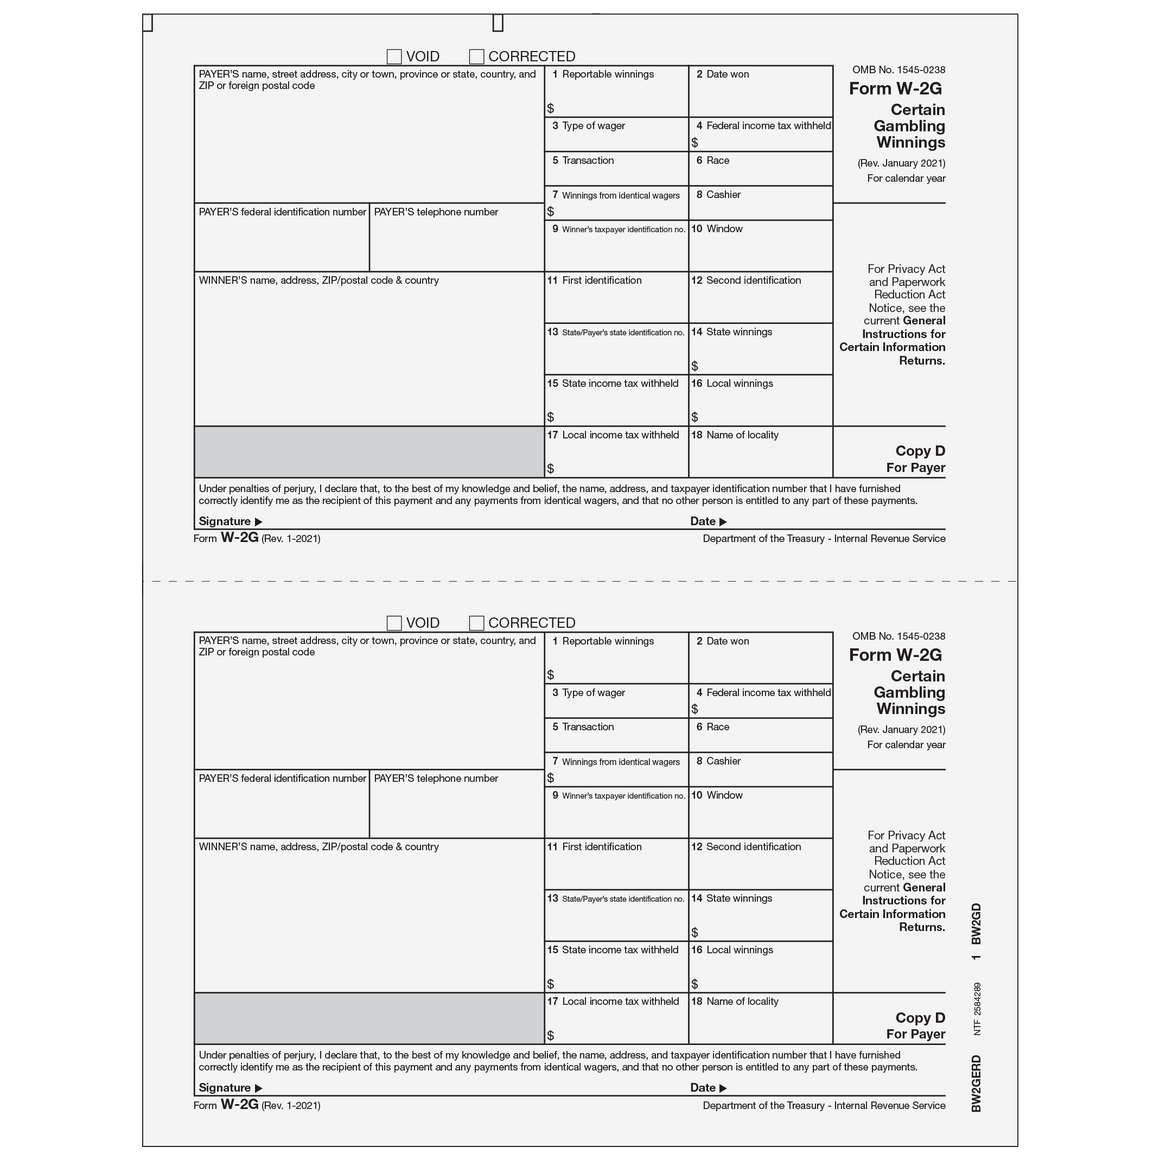 W-2G Payer Record Copy D